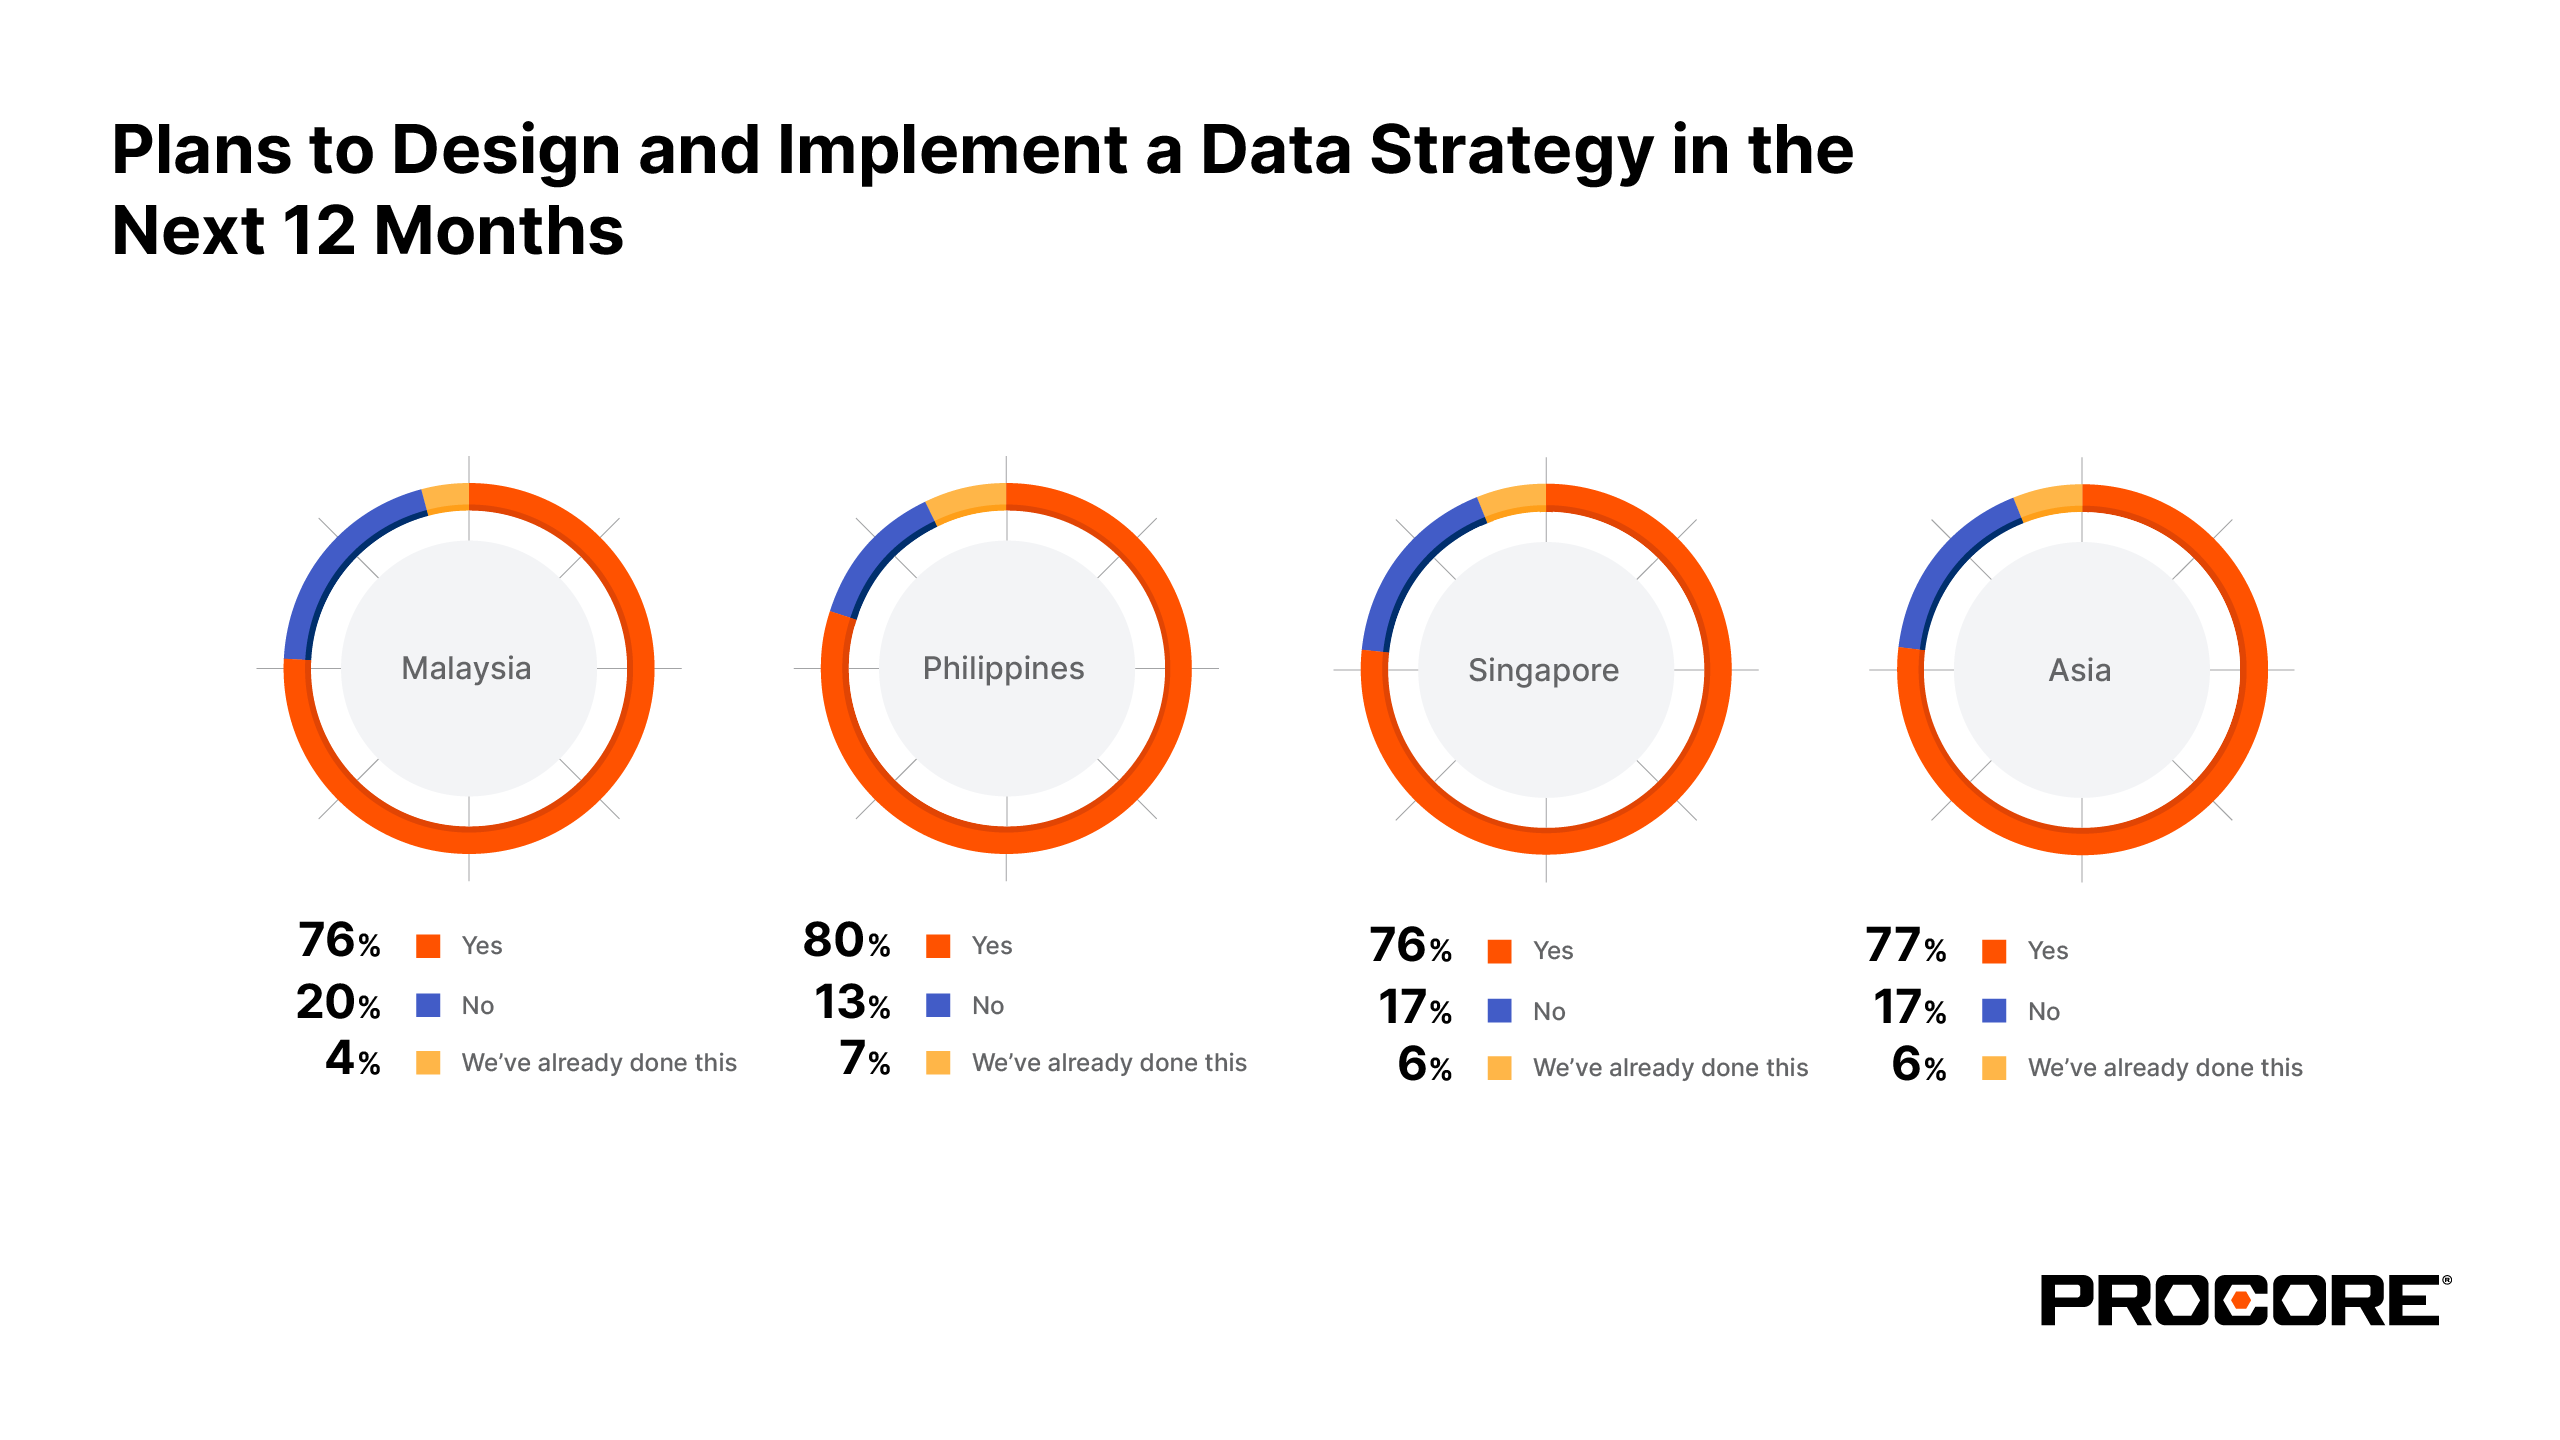 Plans to design and implement a data strategy in the next 12 months charts